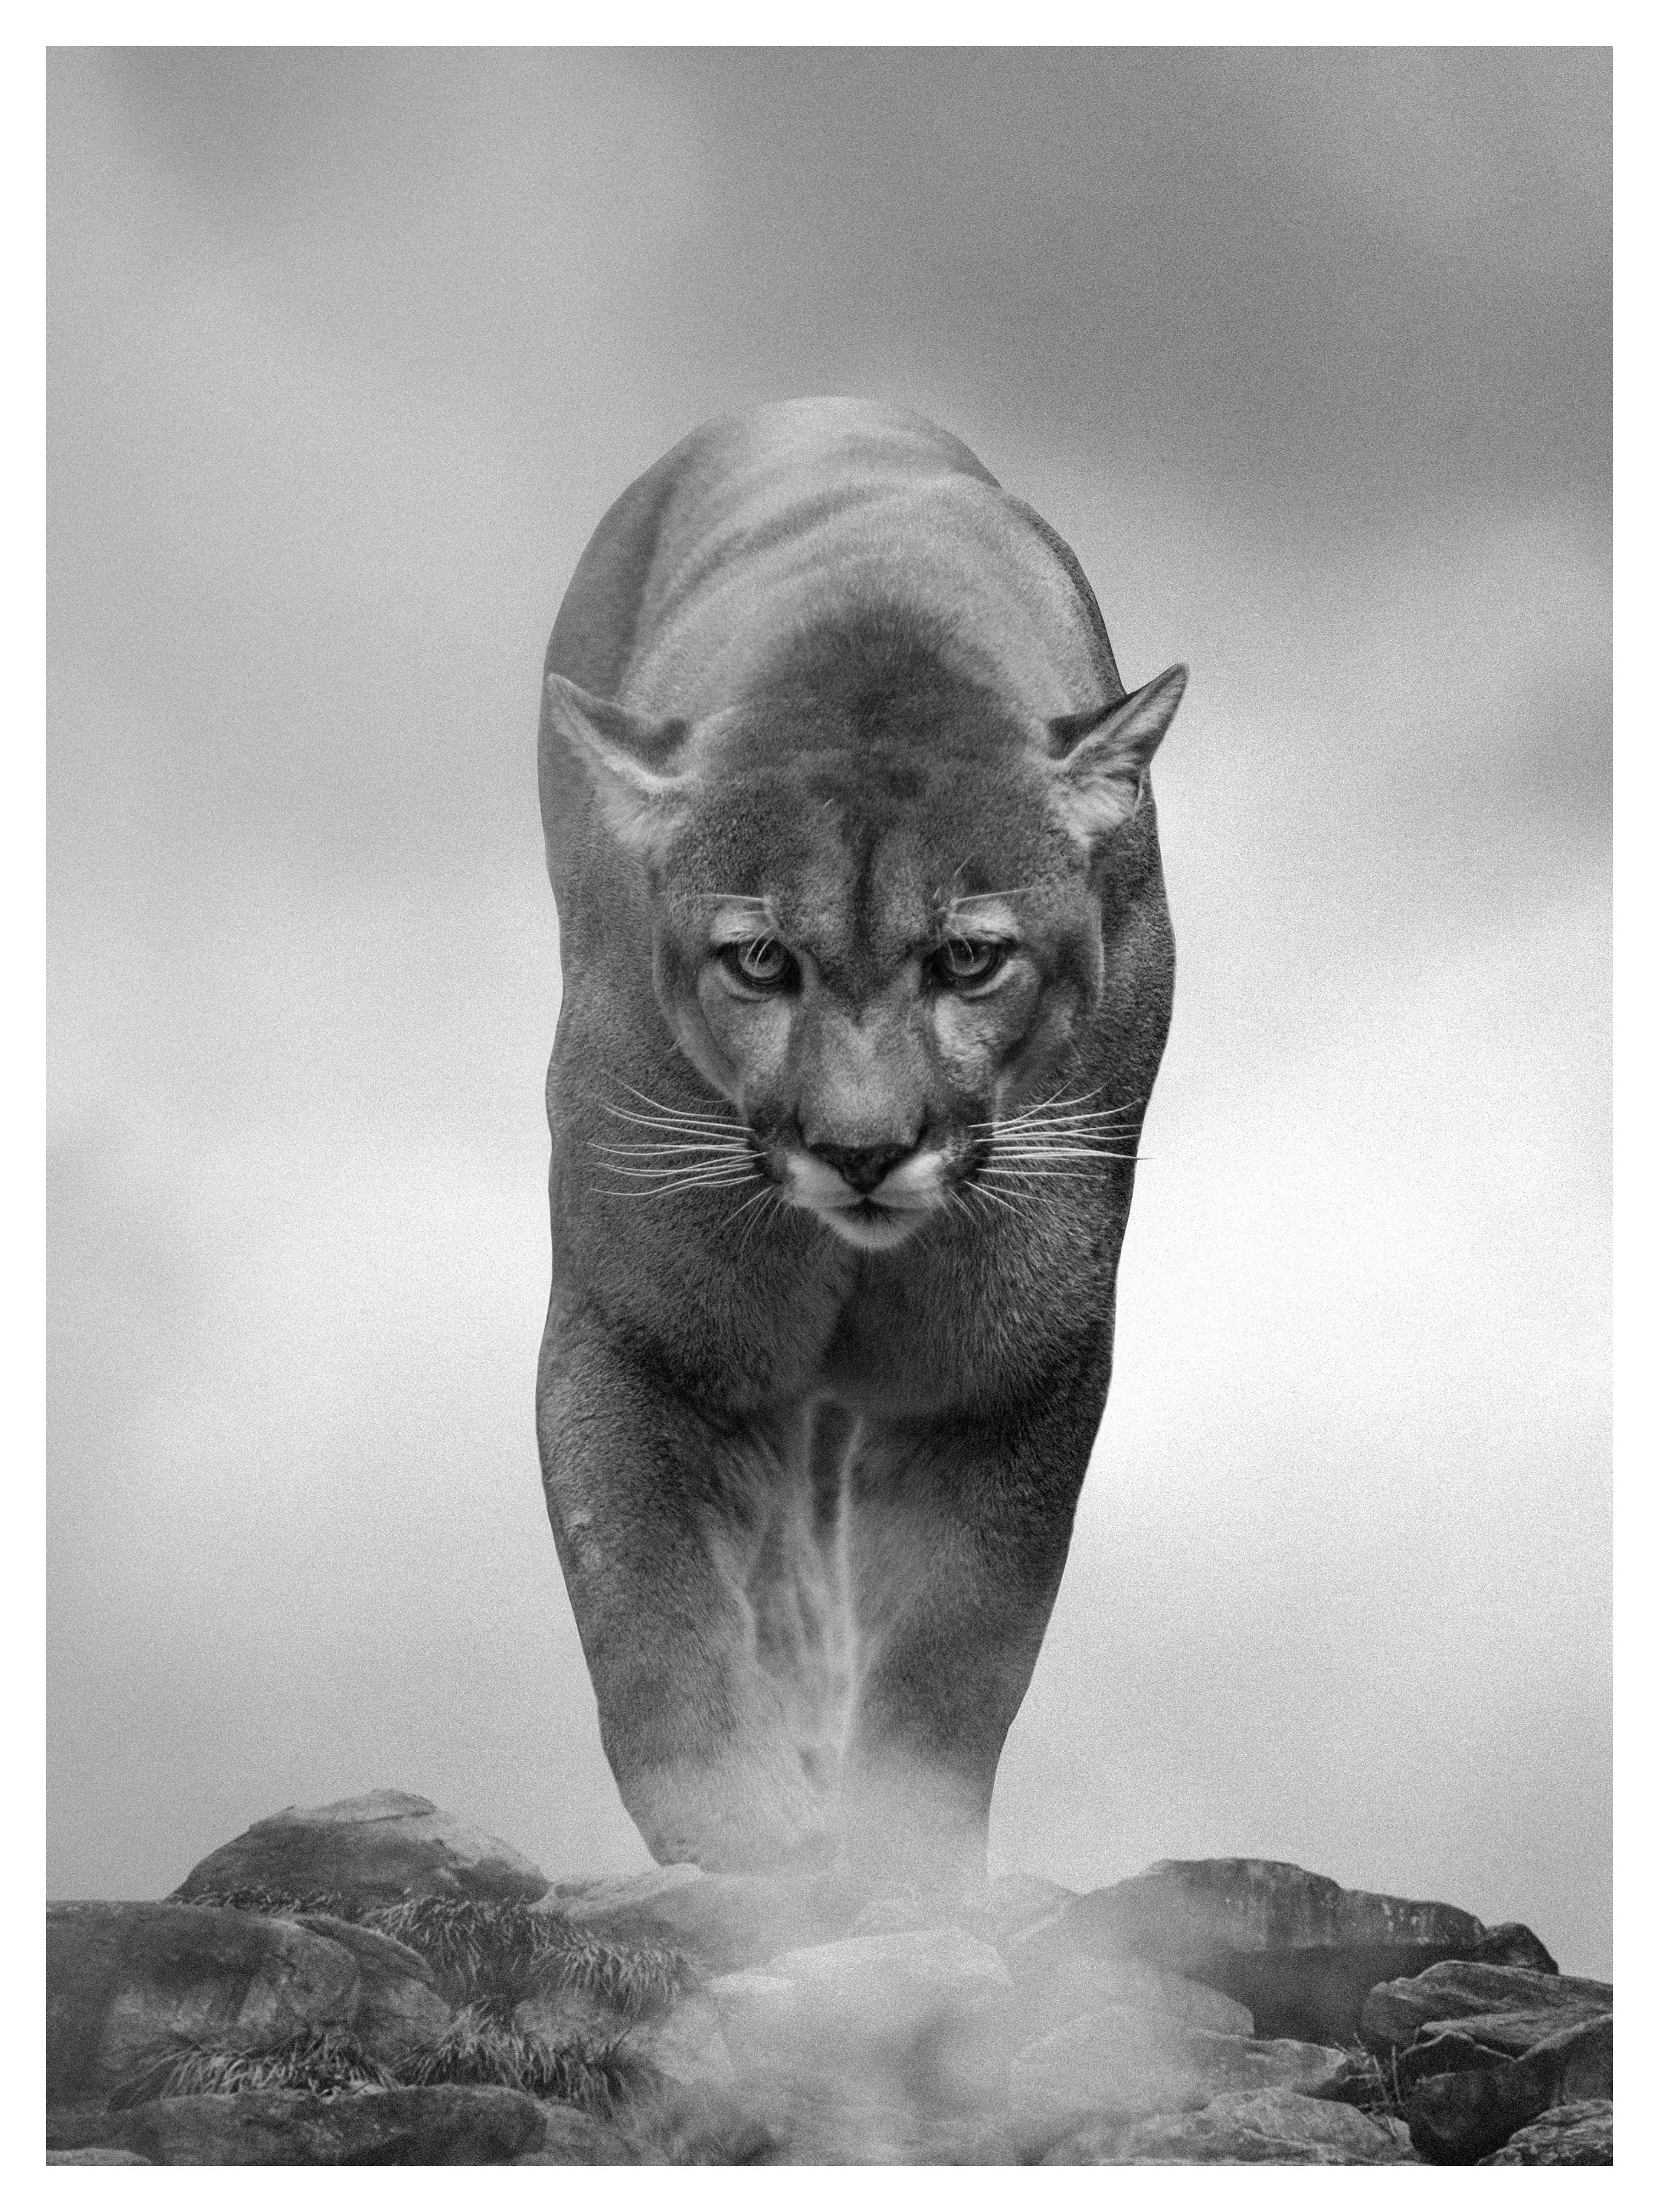 Shane Russeck Landscape Photograph - King of the Mountain - 36x48 Contemporary Black and White Photography, Cougar